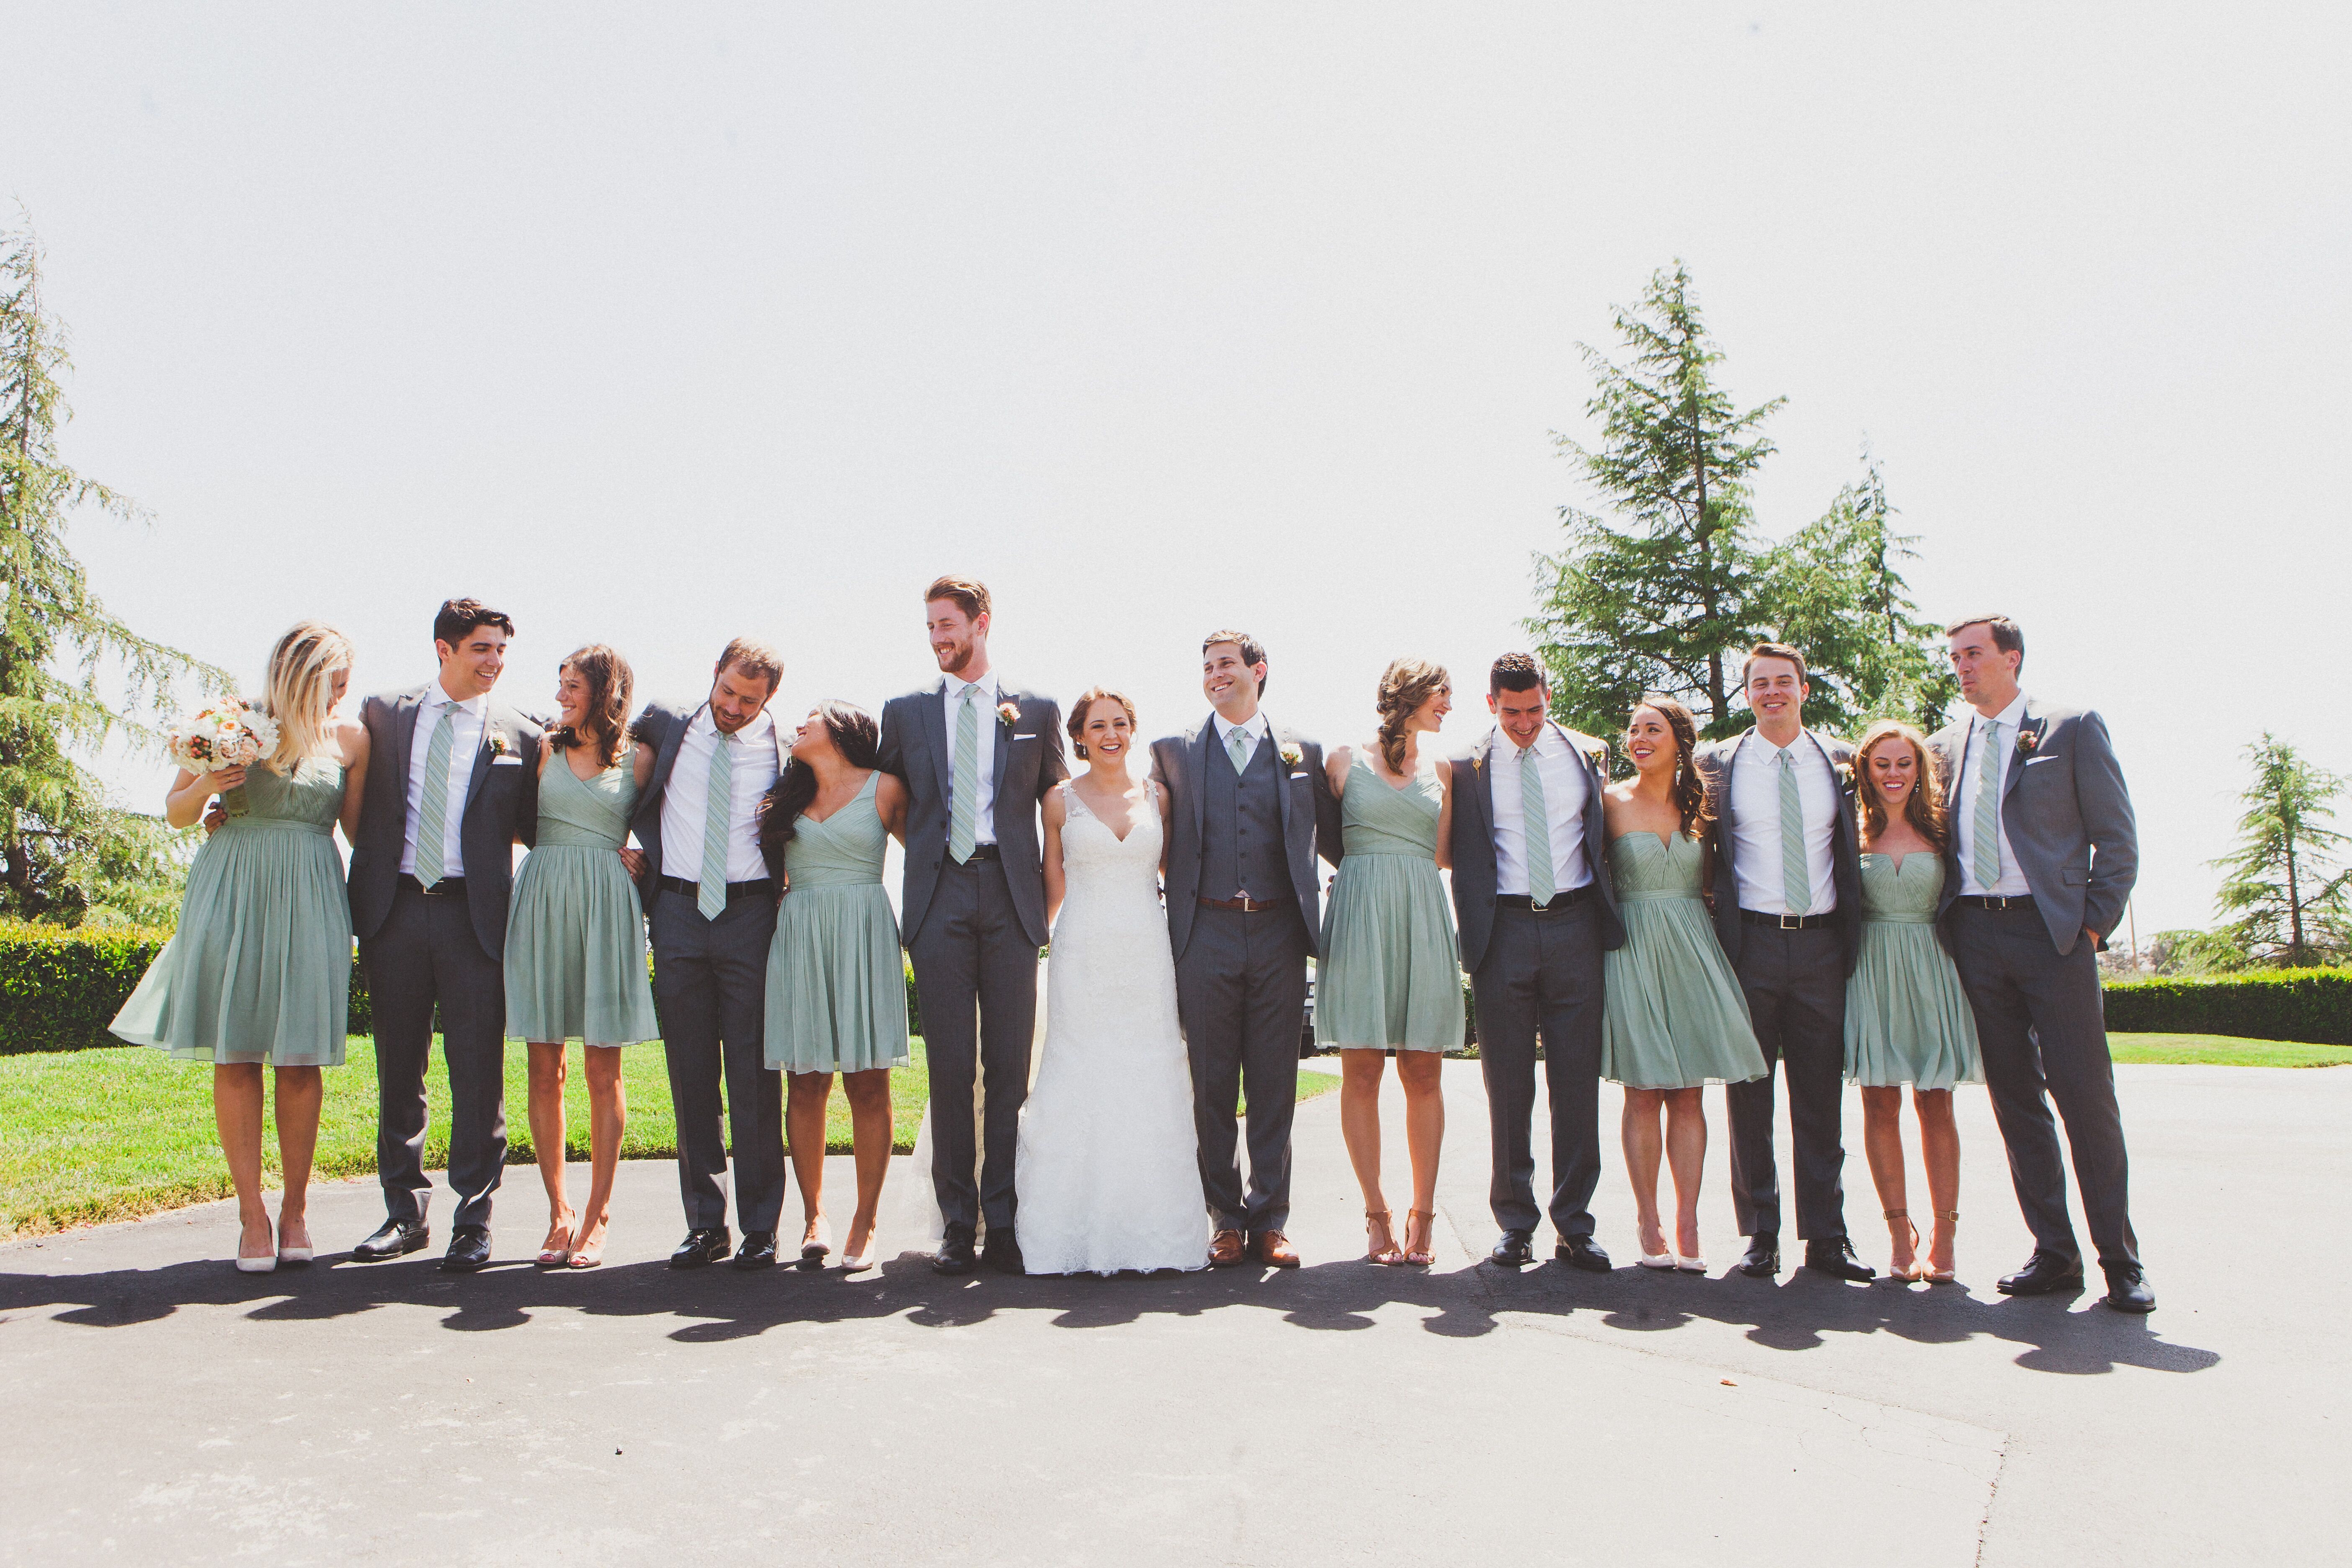 Sage Green and Gray Wedding Party -   17 sage green wedding party ideas